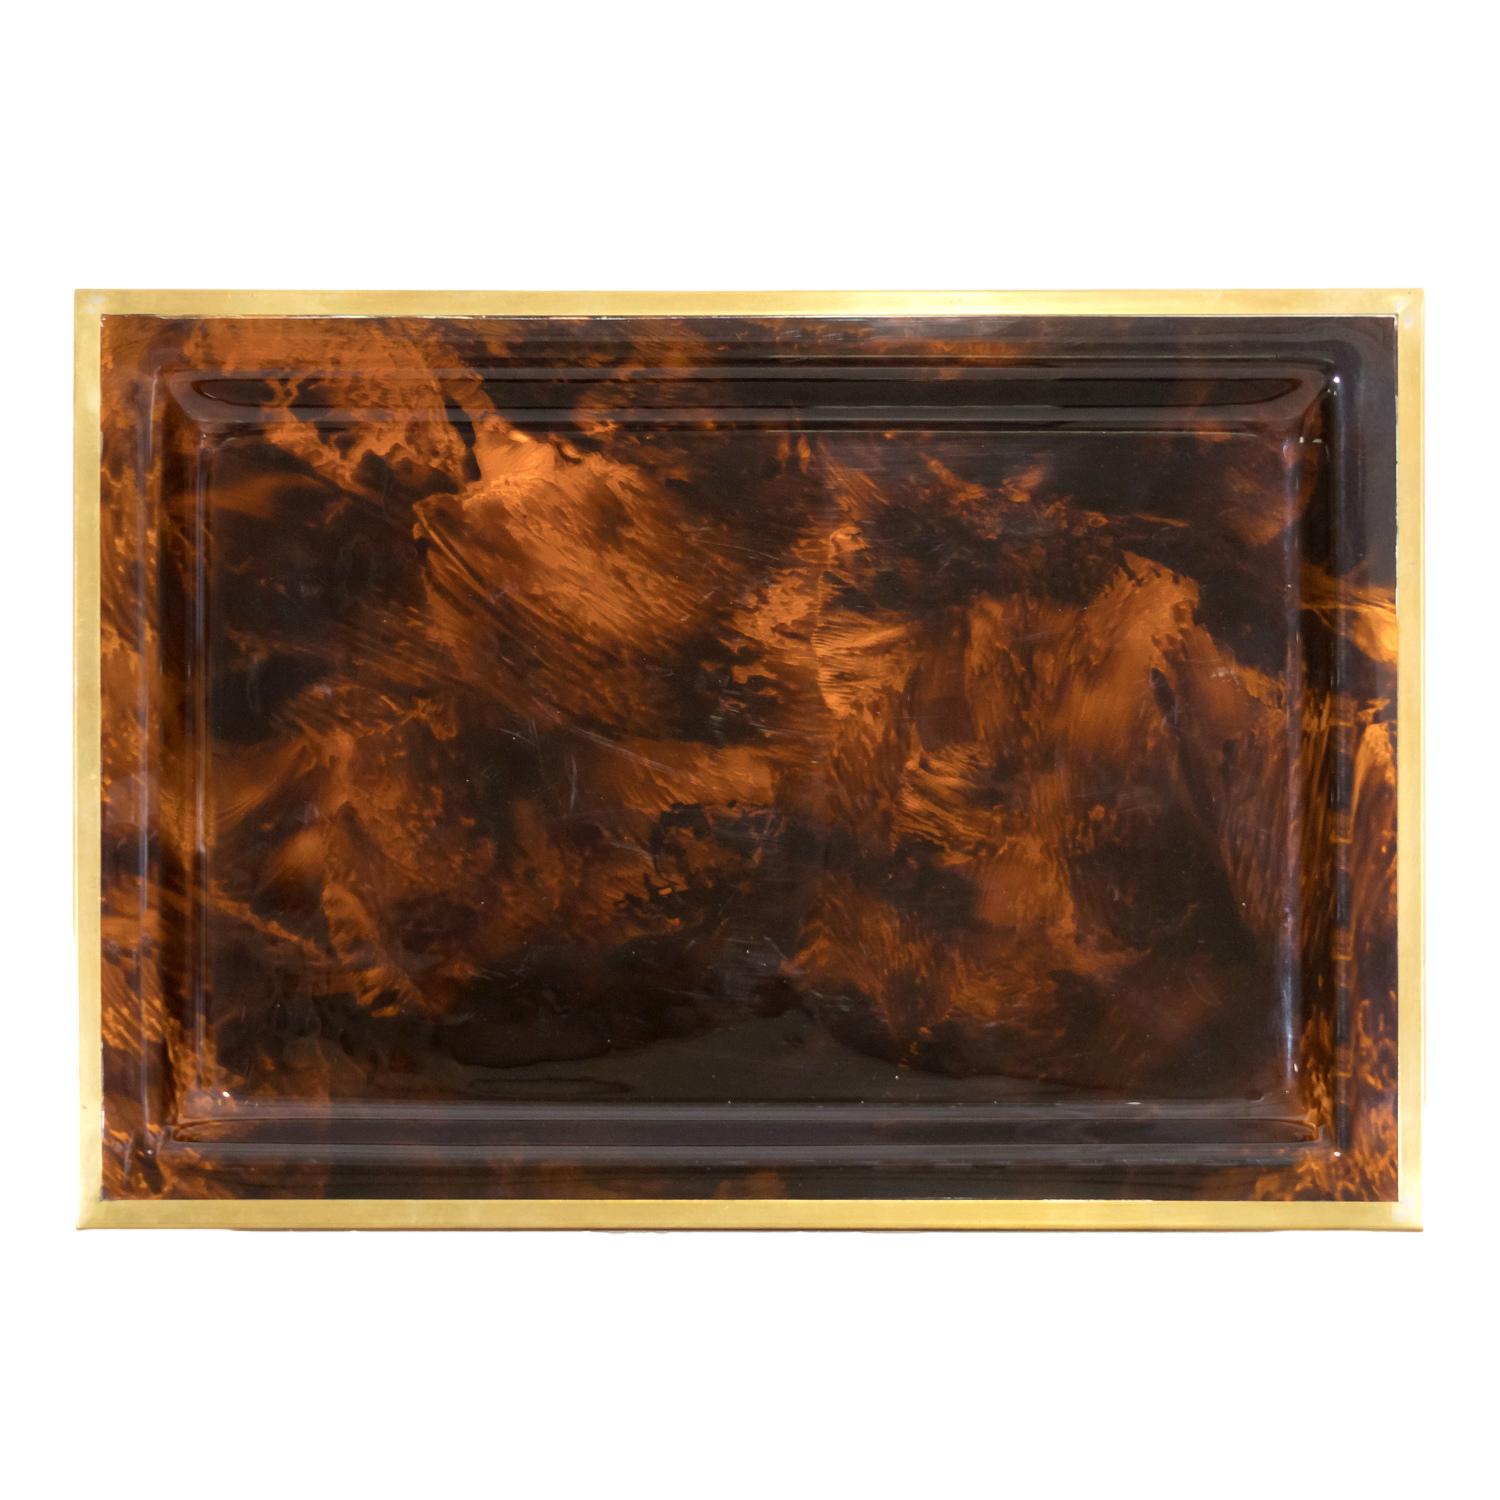 A fabulous 20th century vintage faux tortoiseshell rectangular shaped lucite serving tray or vide-poche with wrapped brass edge made in Italy by Christian Dior Home, circa 1970s. Serve up cocktails in style anytime with this iconic mid-century